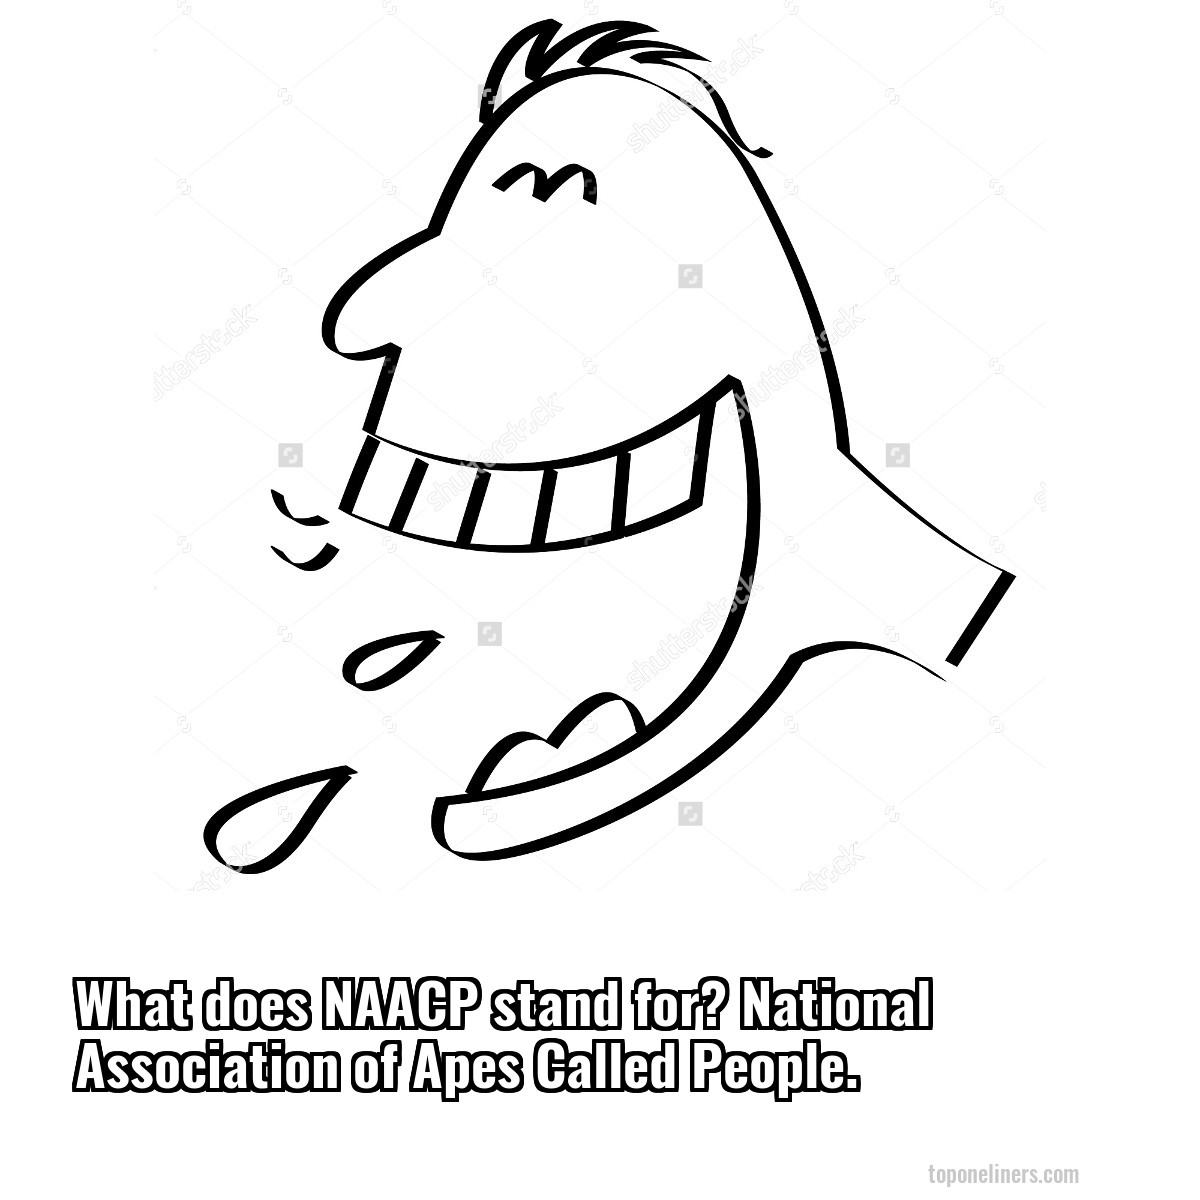 What does NAACP stand for? National Association of Apes Called People.
